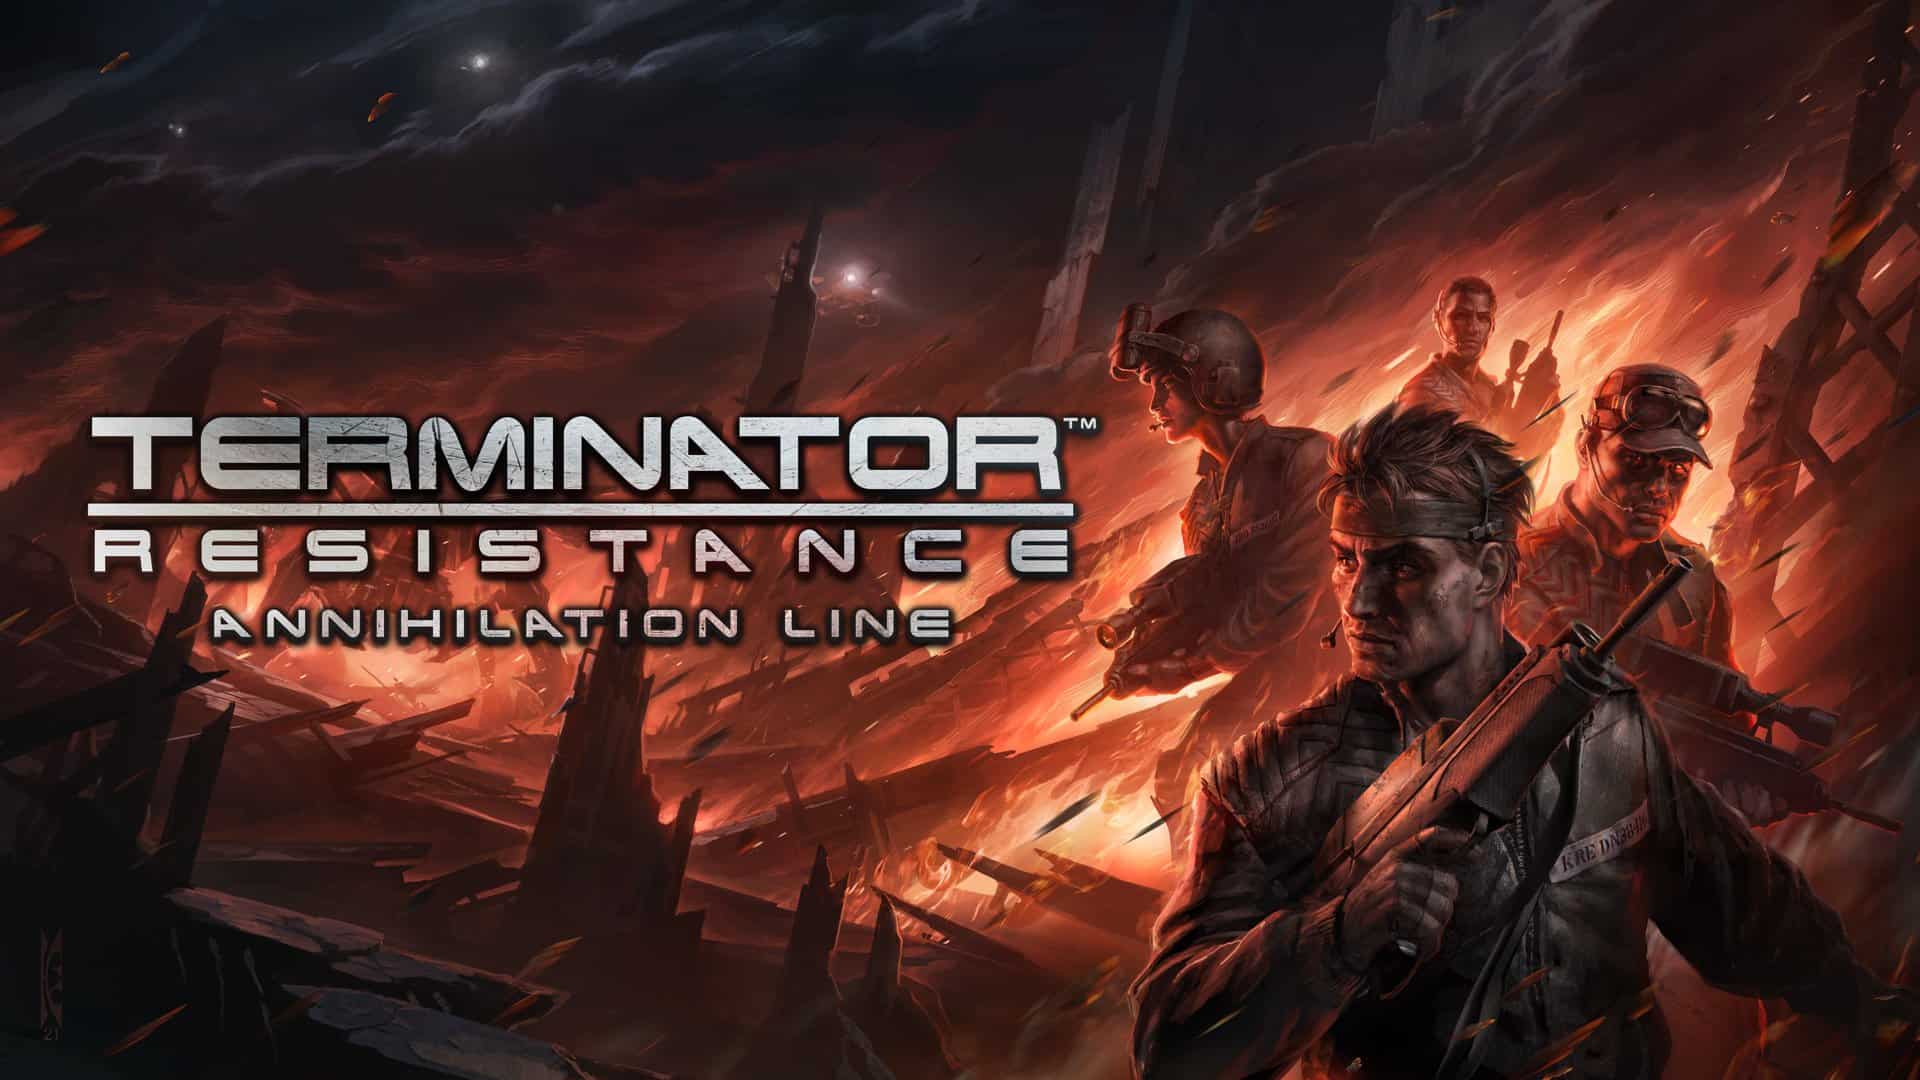 Terminator: Resistance gets new Annihilation Line story DLC featuring Kyle Reese next month